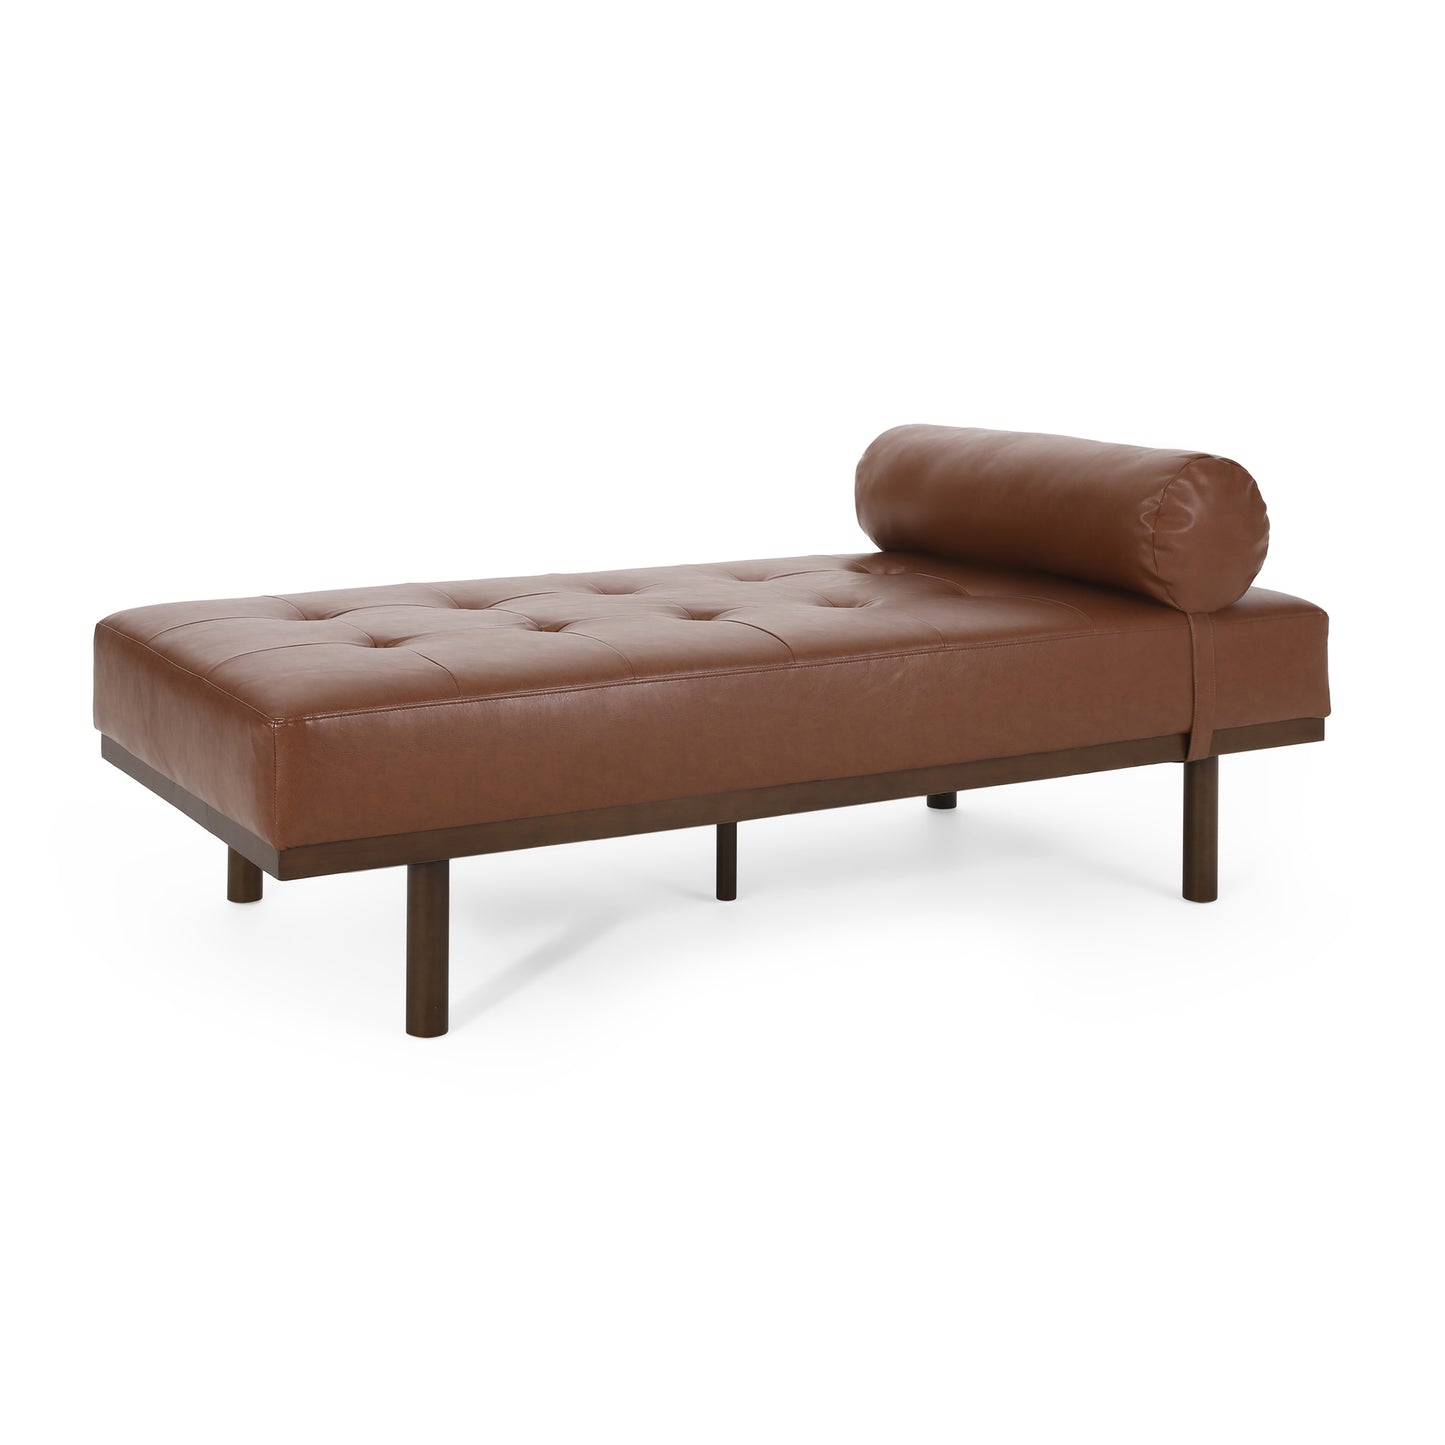 Elmore Mid Century Modern Faux Leather Tufted Chaise Lounge with Bolster Pillow